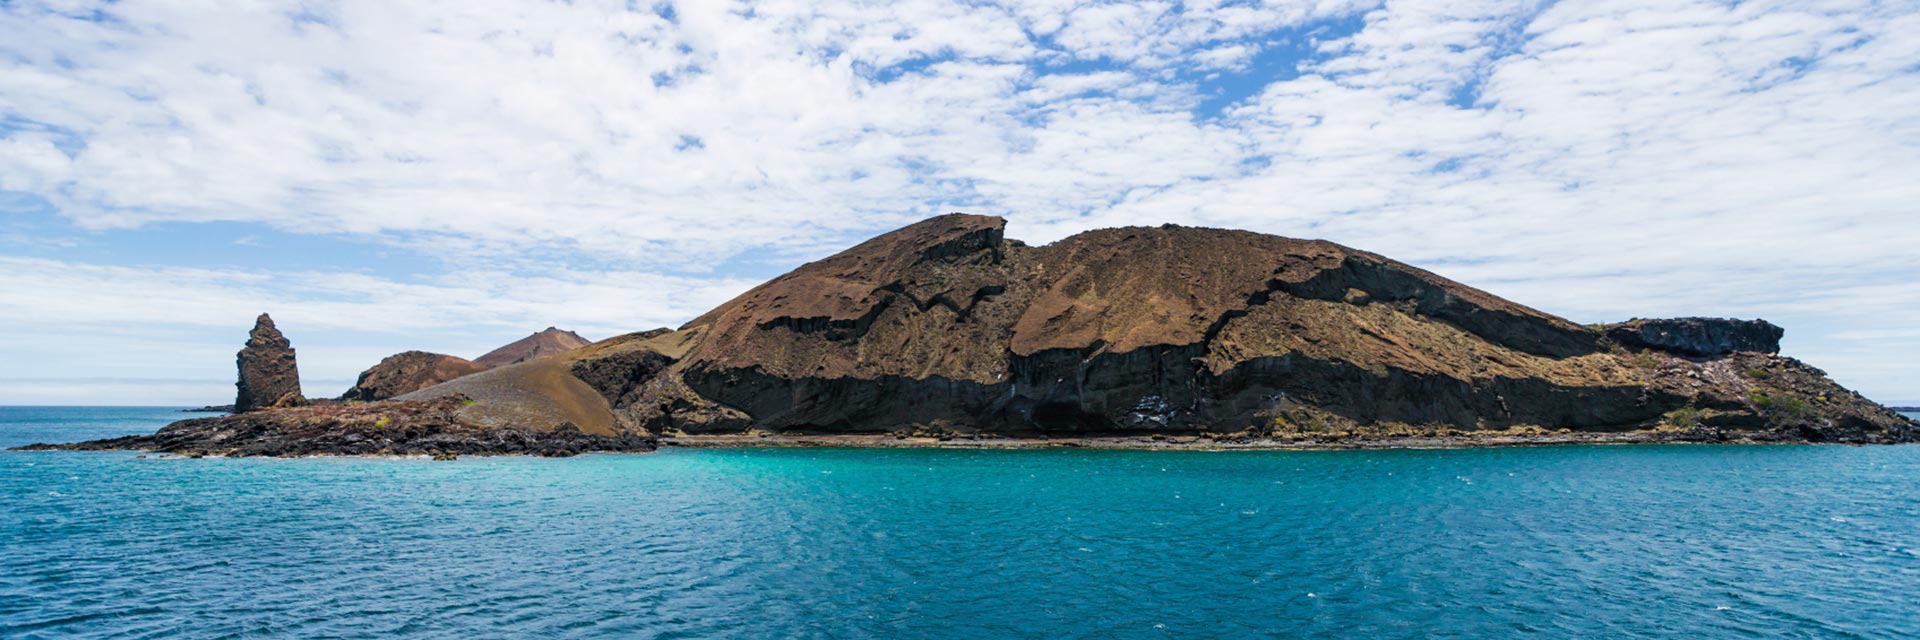 Book your Spanish course on the Galapagos Islands - © Miralex